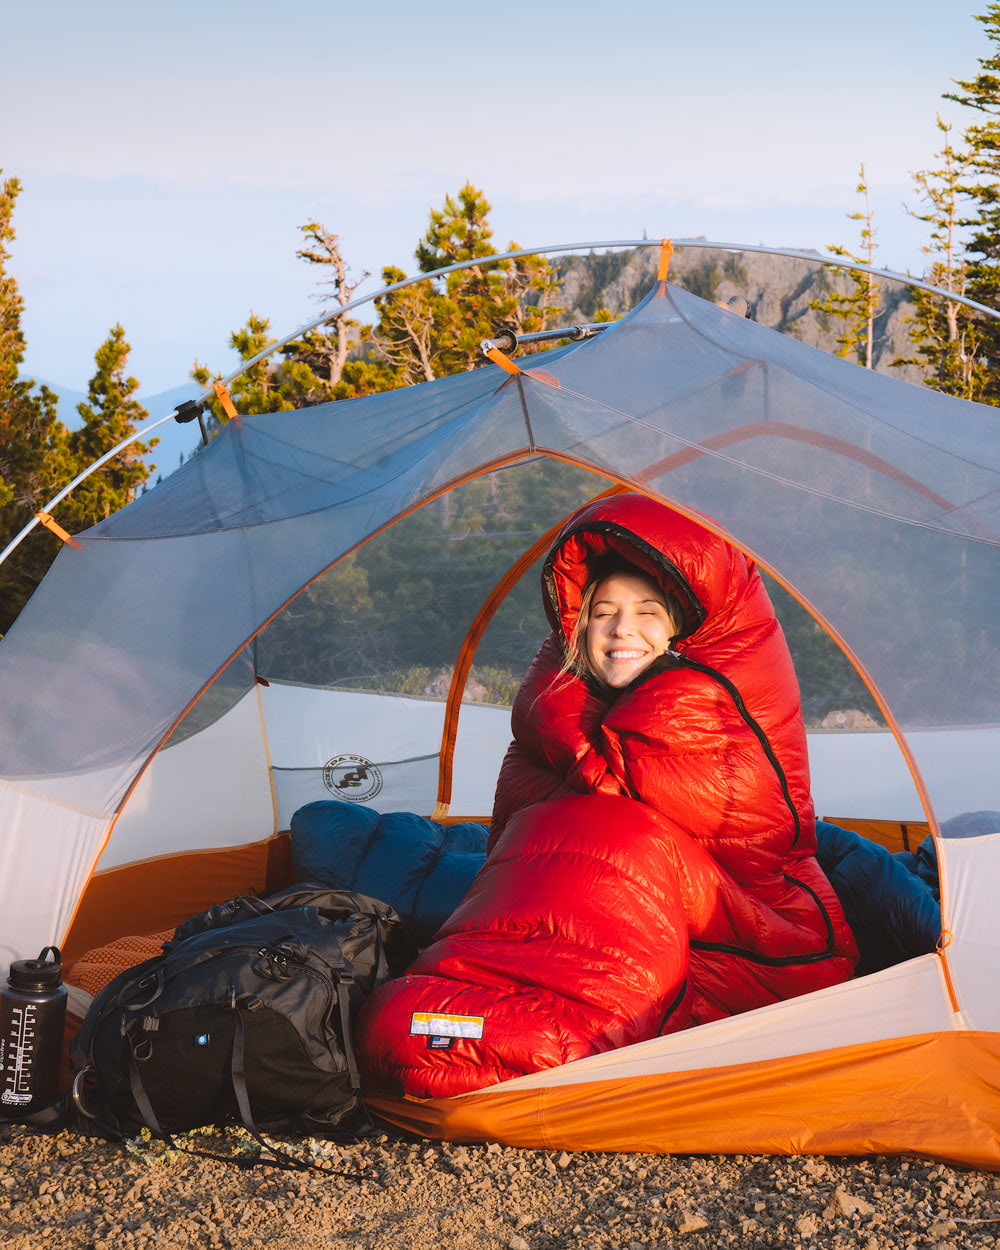 How To Get Over Your Fears of First Time Backcountry Camping - Sleeping In A Tent